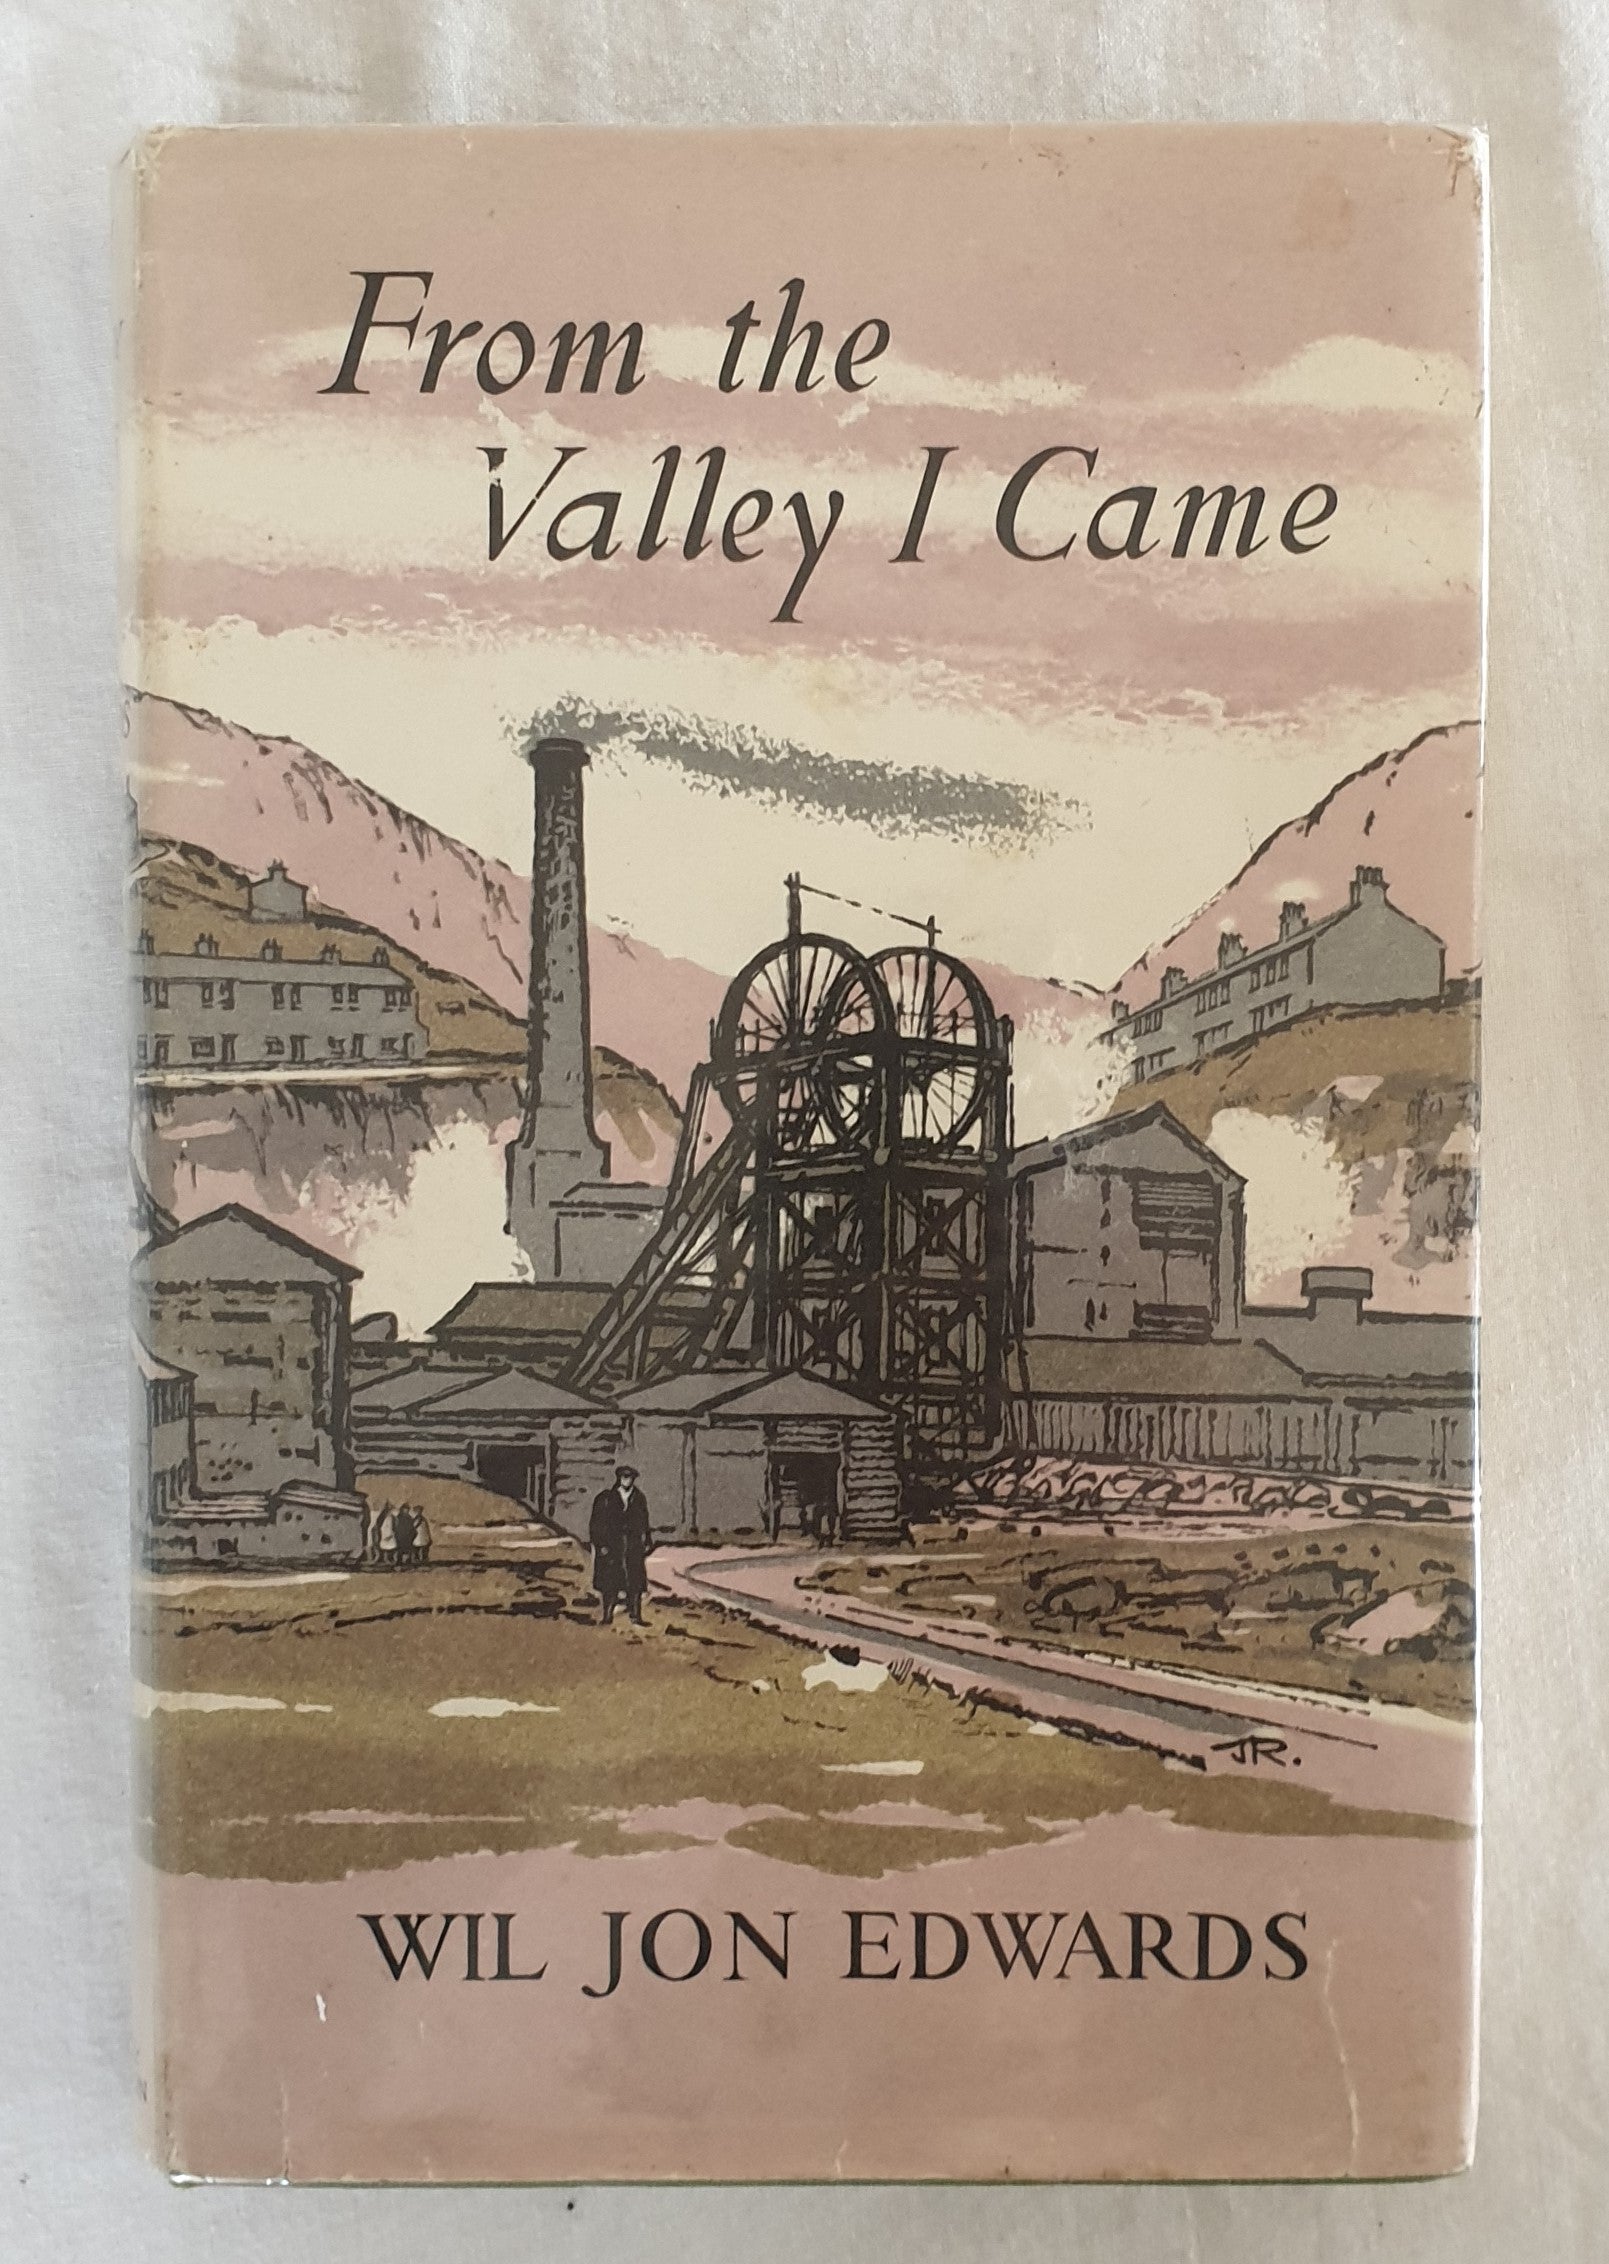 From the Valley I Came by Wil Jon Edwards